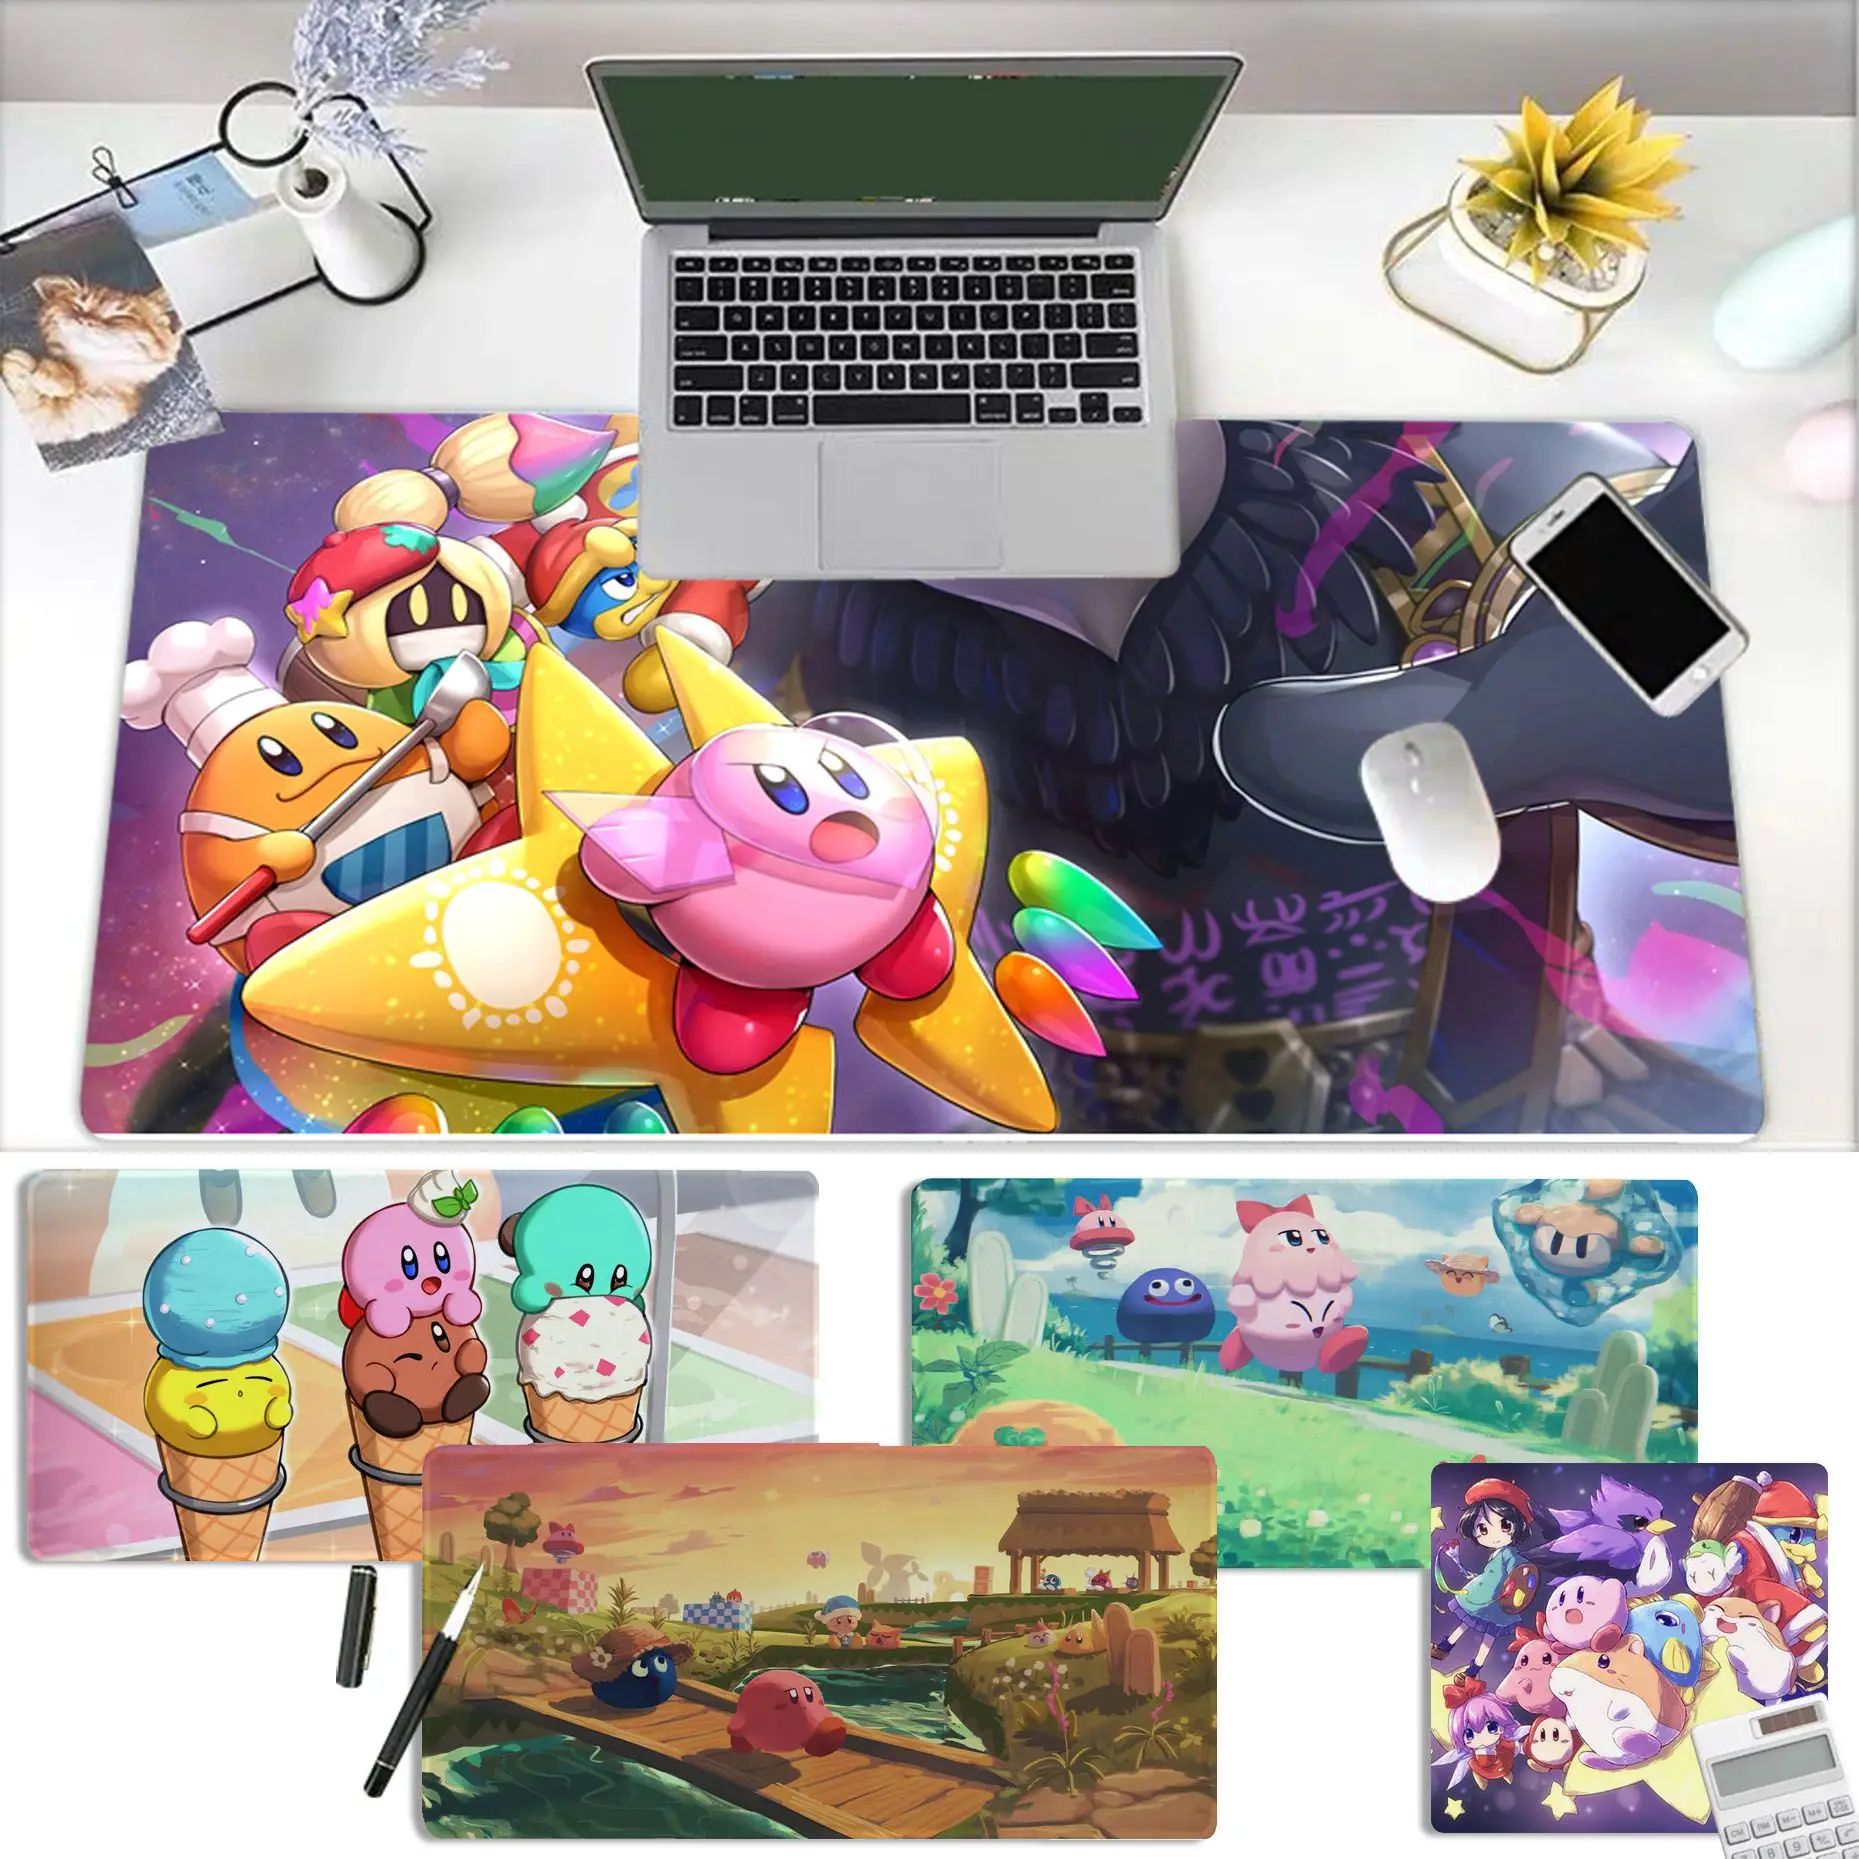 

Cute Cartoon K-Kirby Mousepad High Quality Customized Laptop Gaming Mouse Pad Size For Gameing World Of Tanks CS GO Zelda